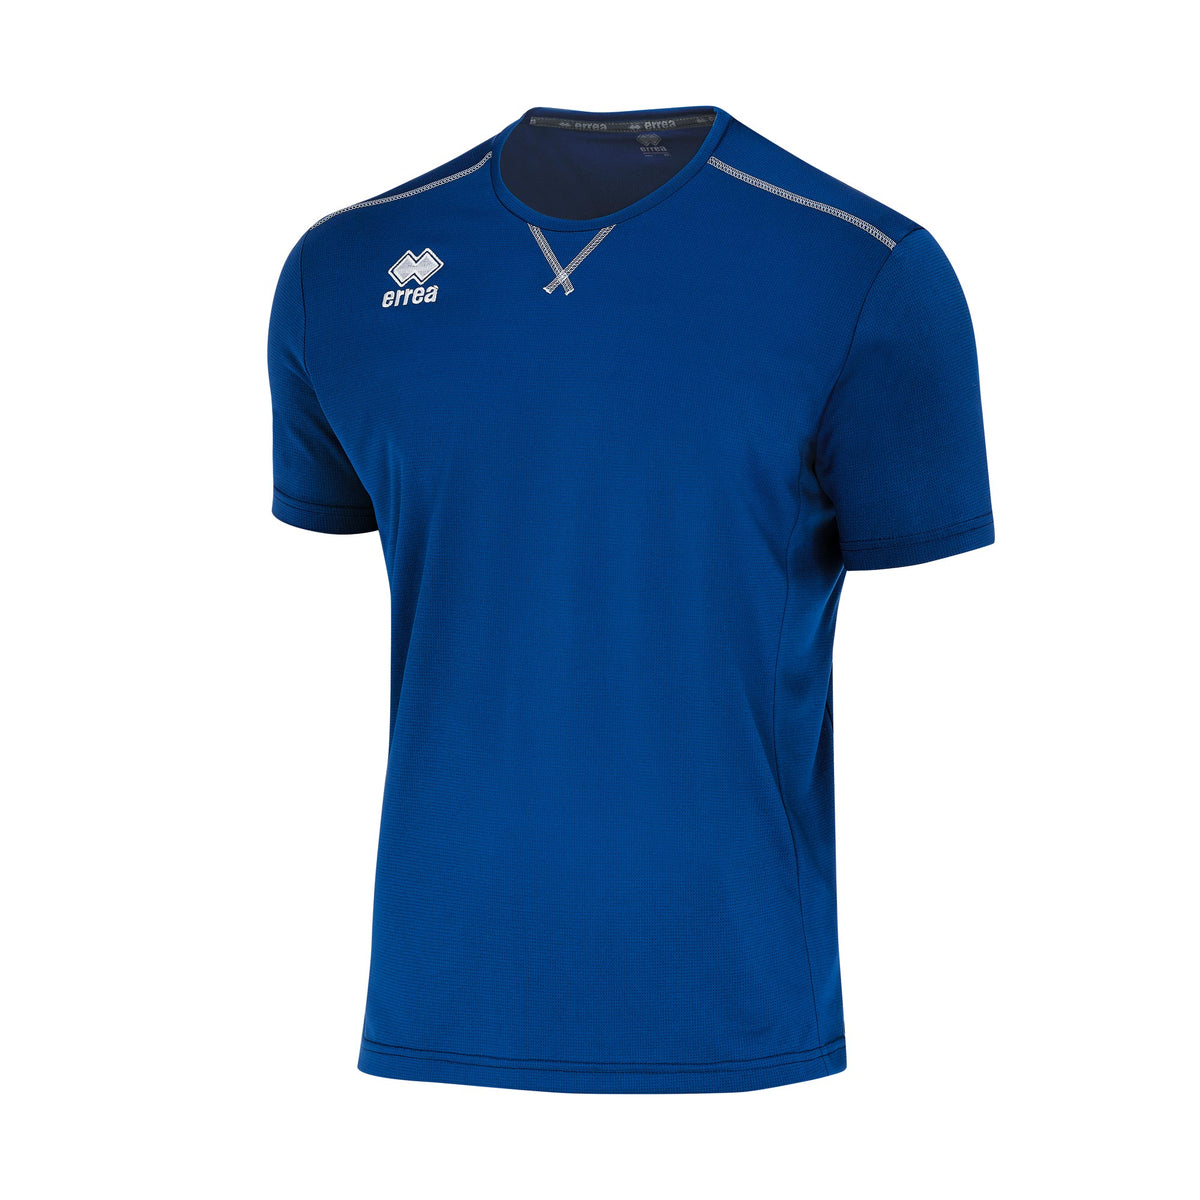 Everton Shirt in Adult